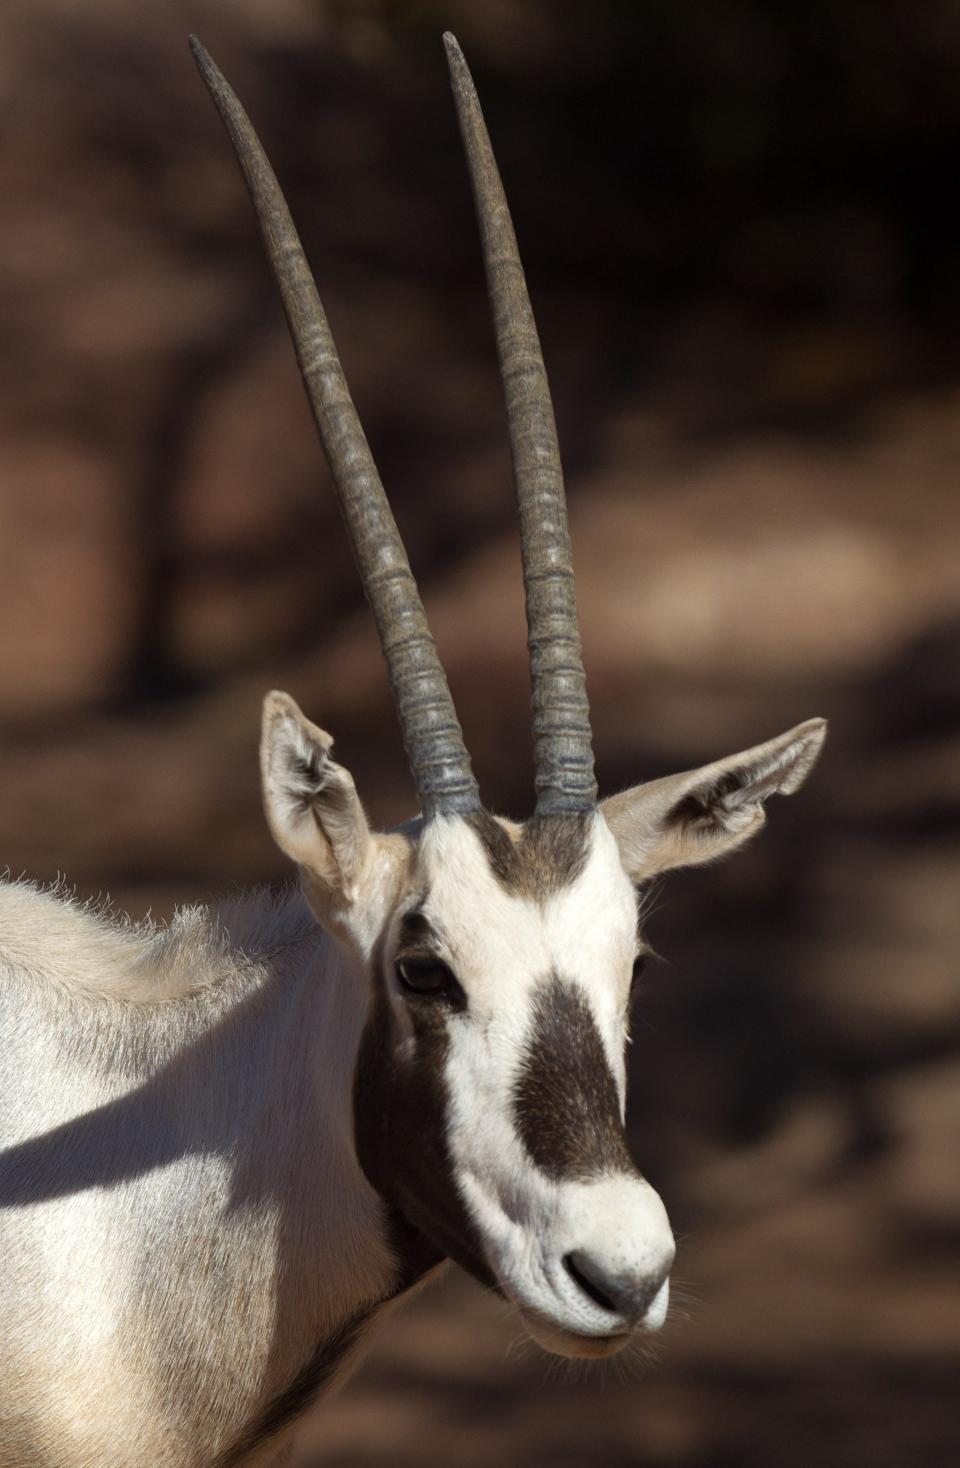 'Operation Oryx' at the Phoenix Zoo: In 1963, the Phoenix Zoo launched its famous "Operation Oryx" program, in which five of the nearly extinct animals were brought to the zoo for one of the first captive-breeding programs in history. More than 200 have been born since then.